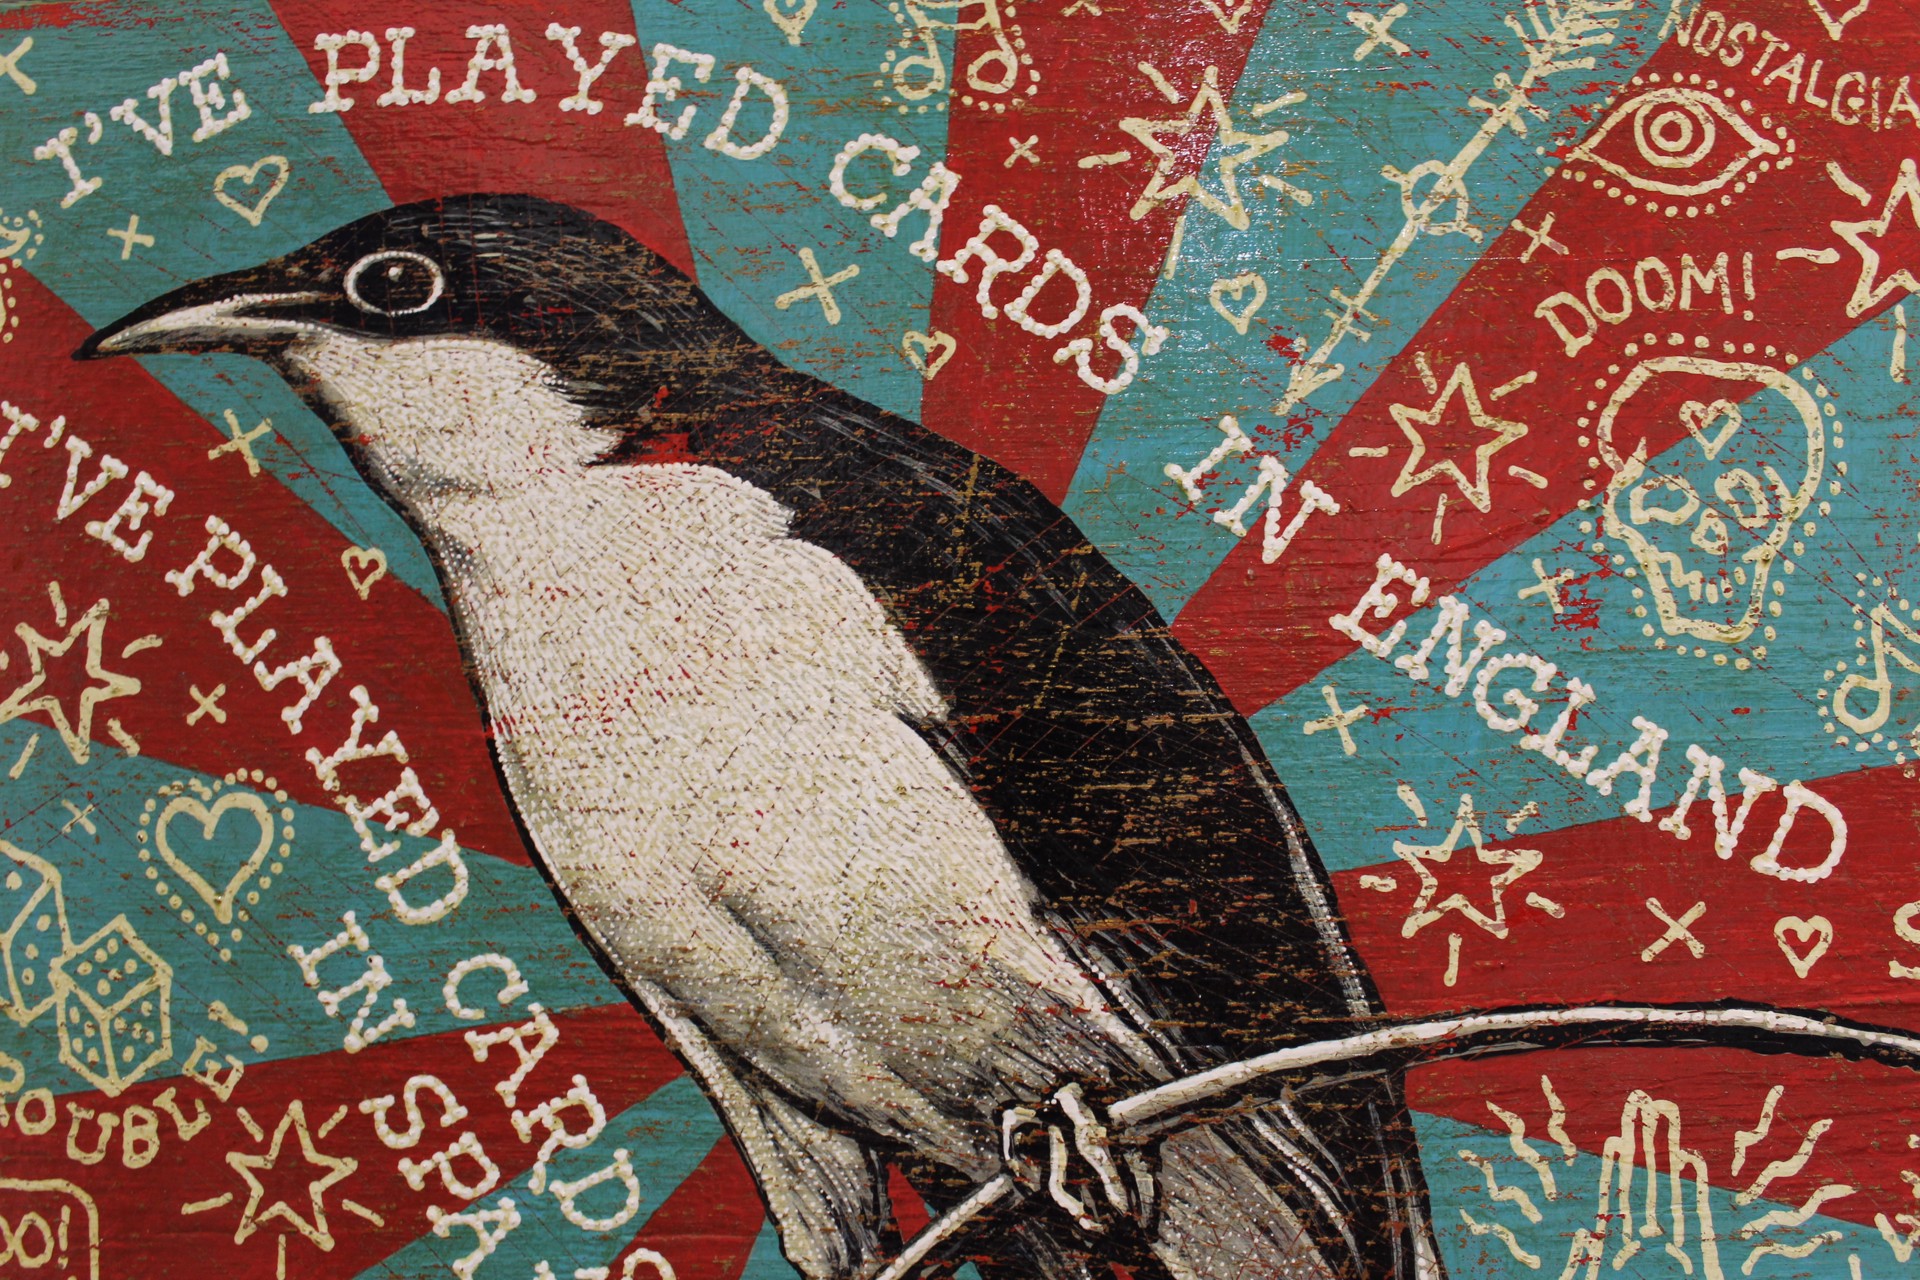 Played Cards in England Coo Coo by Jon Langford